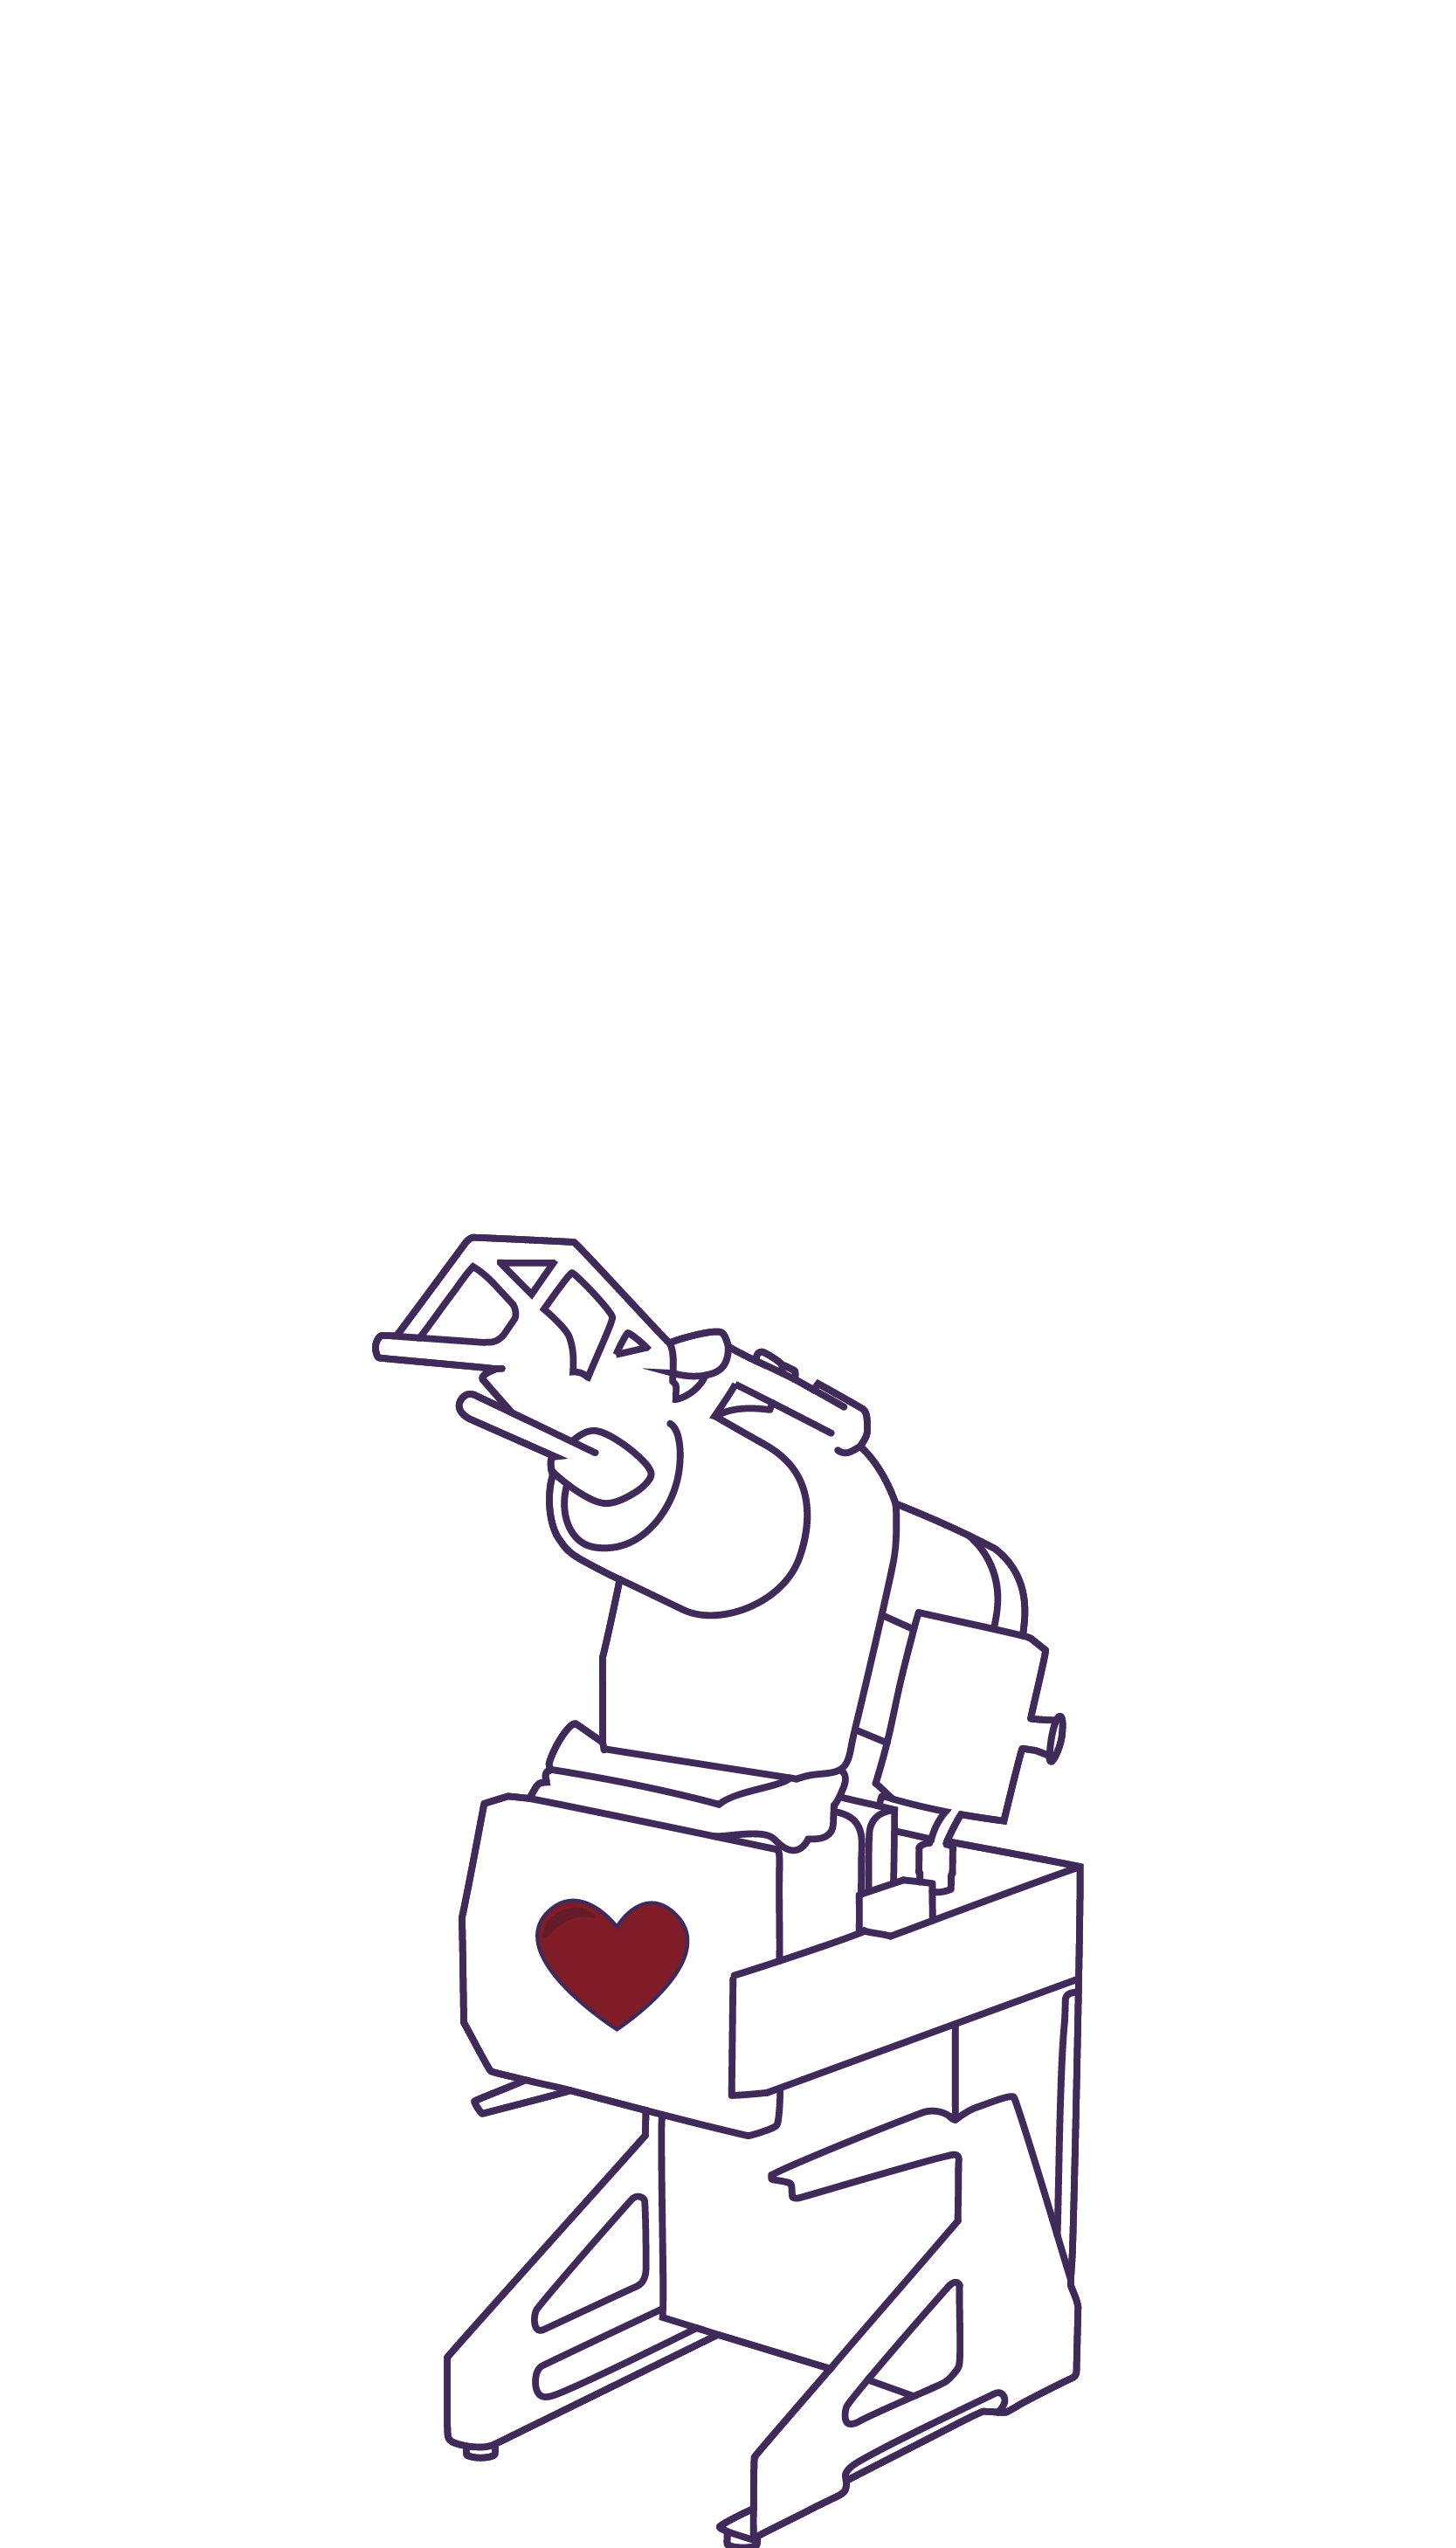 Machine Outline with a Heart